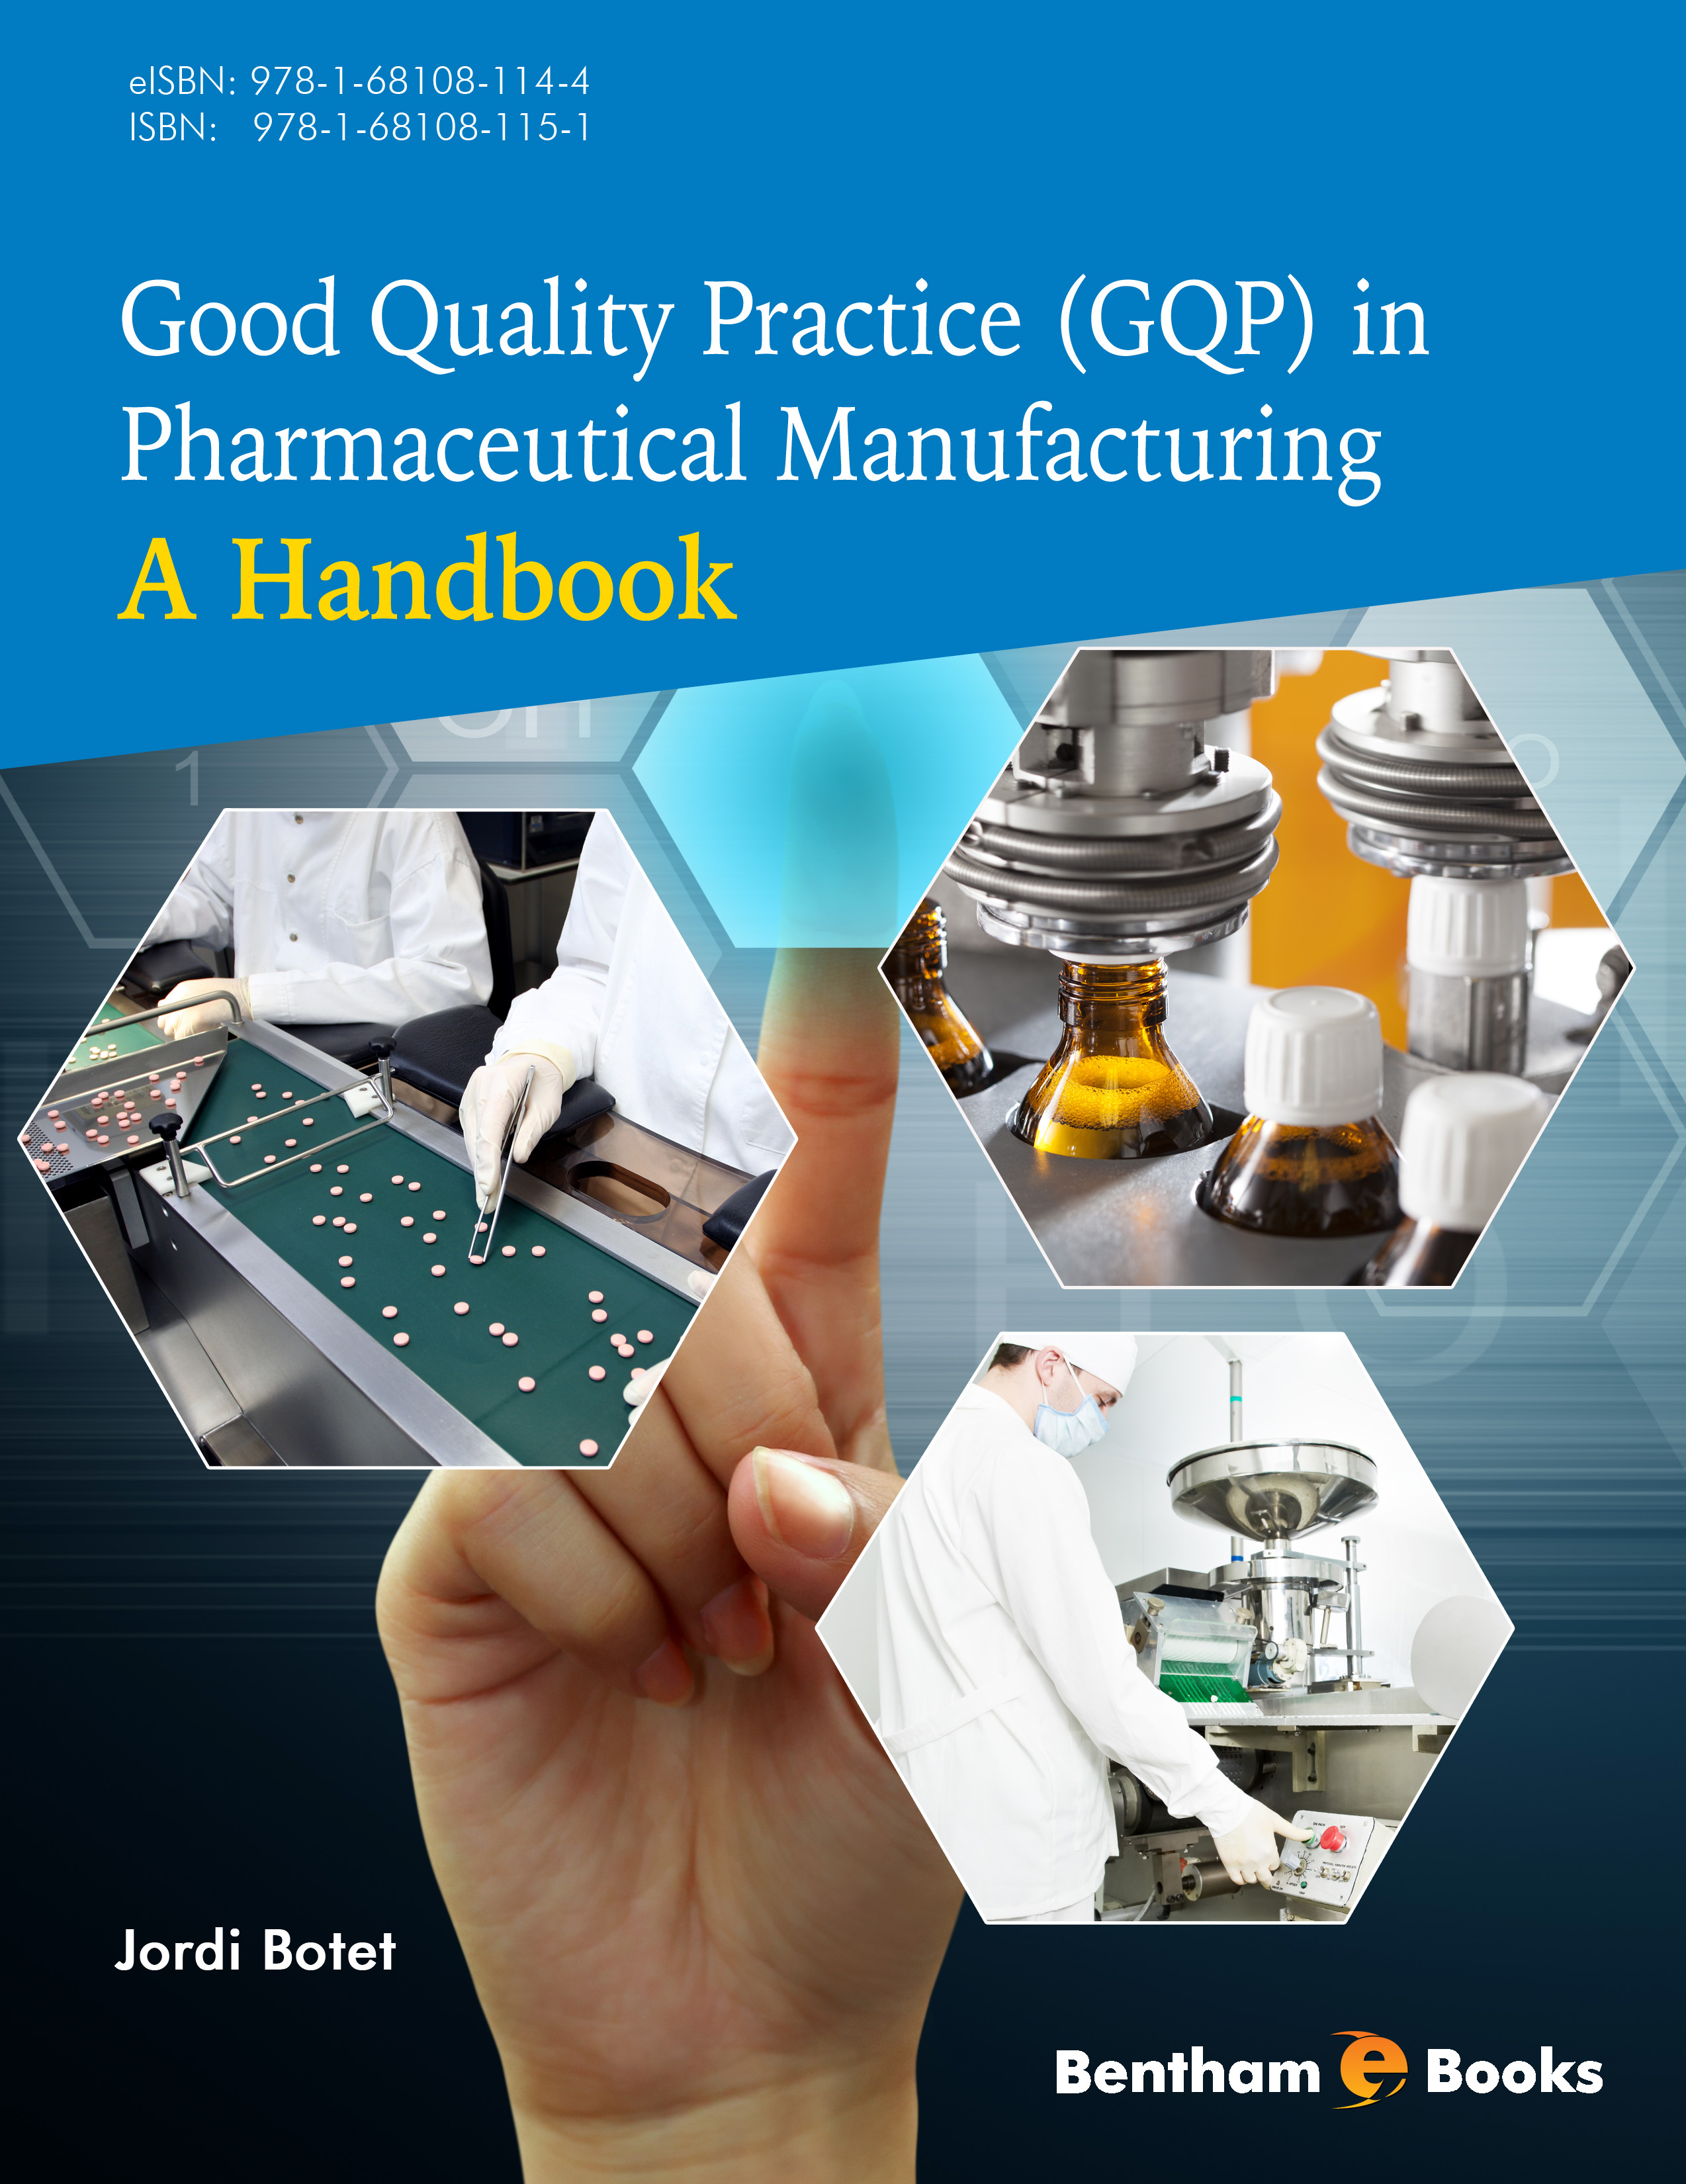 Good Quality Practice (GQP) in Pharmaceutical Manufacturing: A Handbook